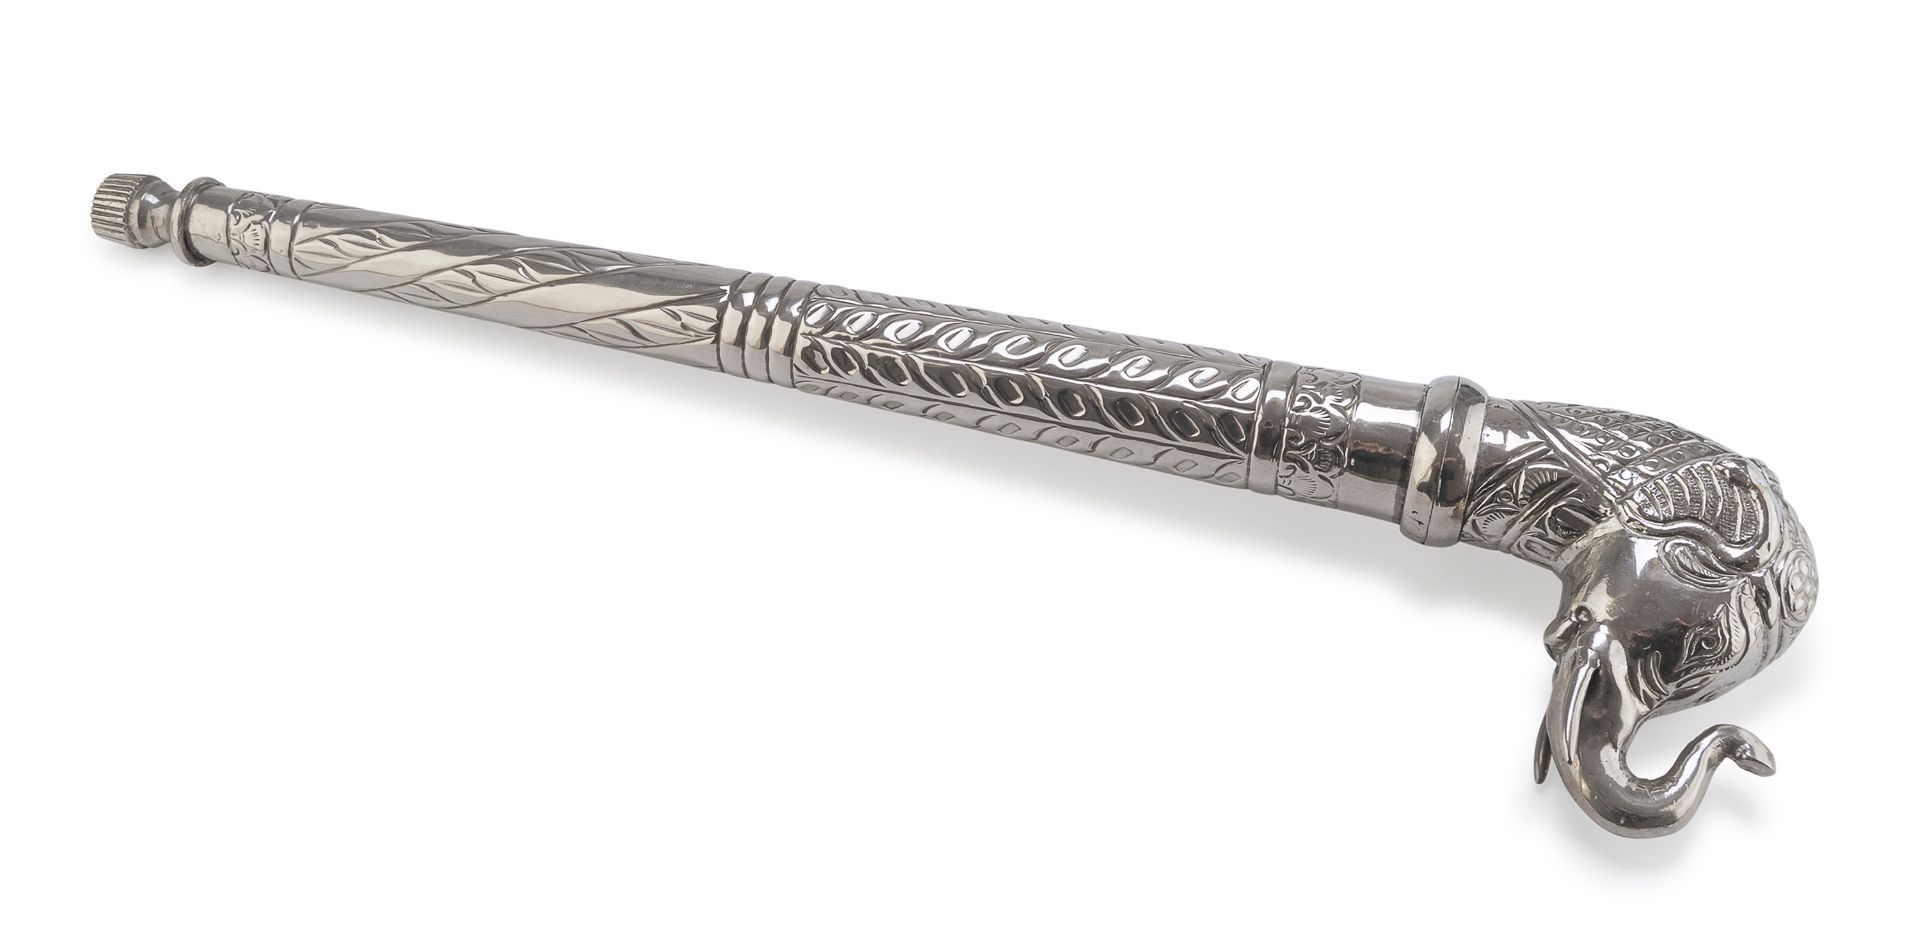 A PROBABLY INDIAN SILVER-PLATED SCEPTER 20TH CENTURY.